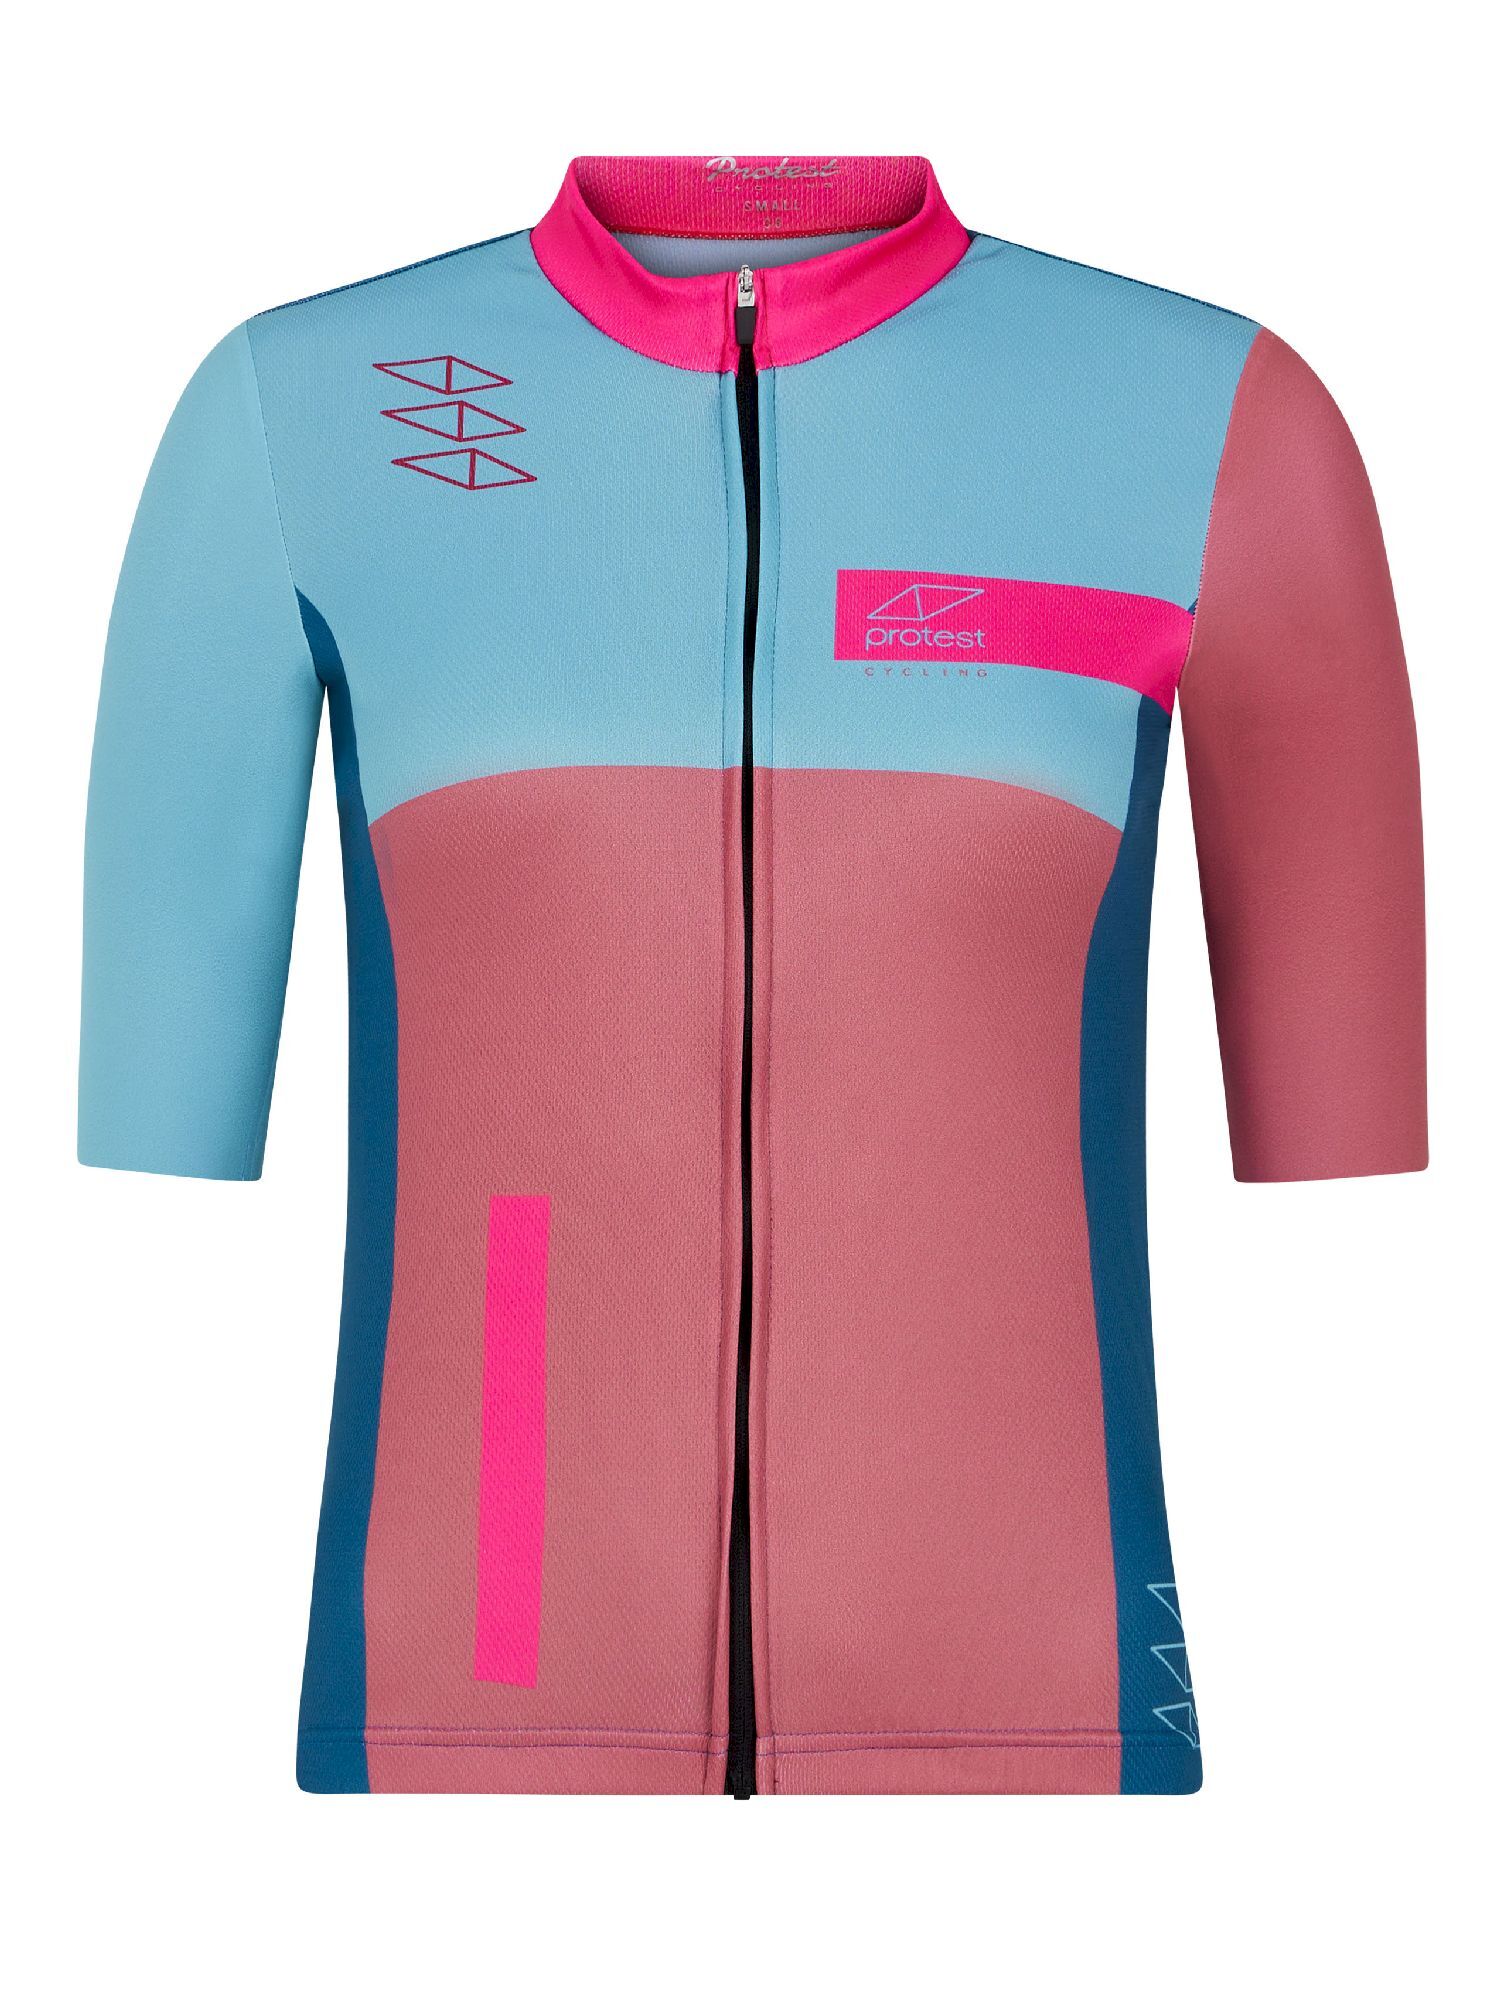 Protest Prtbazaar - Maillot ciclismo - Mujer | Hardloop